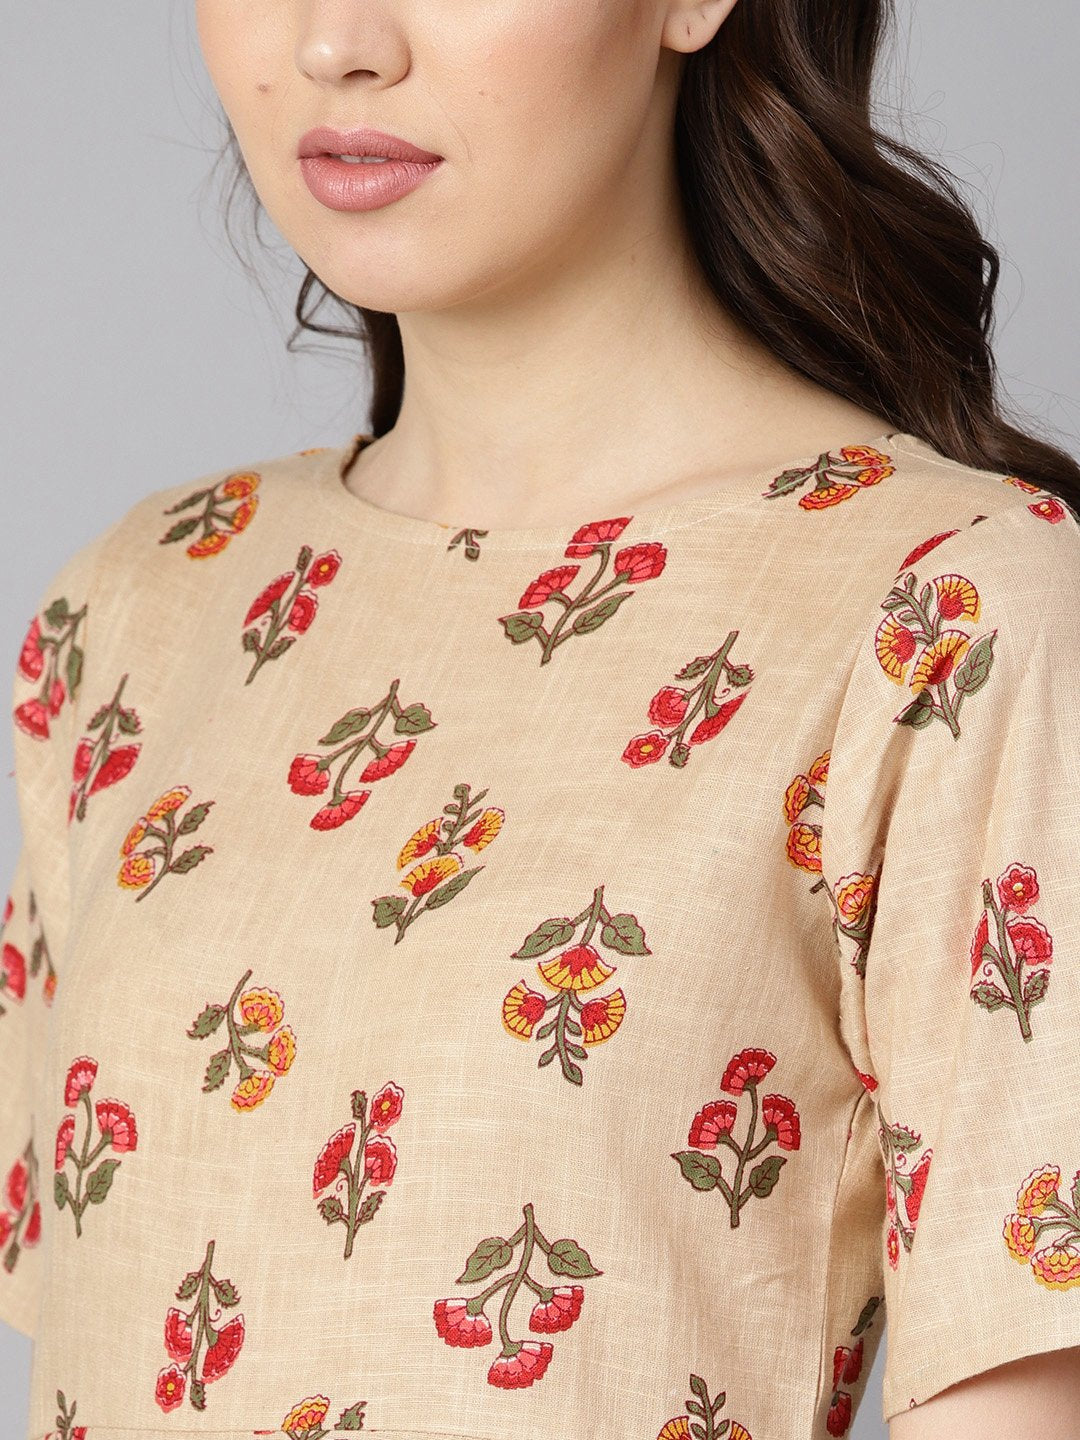 Women's Beige Floral Printed  Boat Neck Half Sleeve Straight Kurta With Solid Pants. - Nayo Clothing